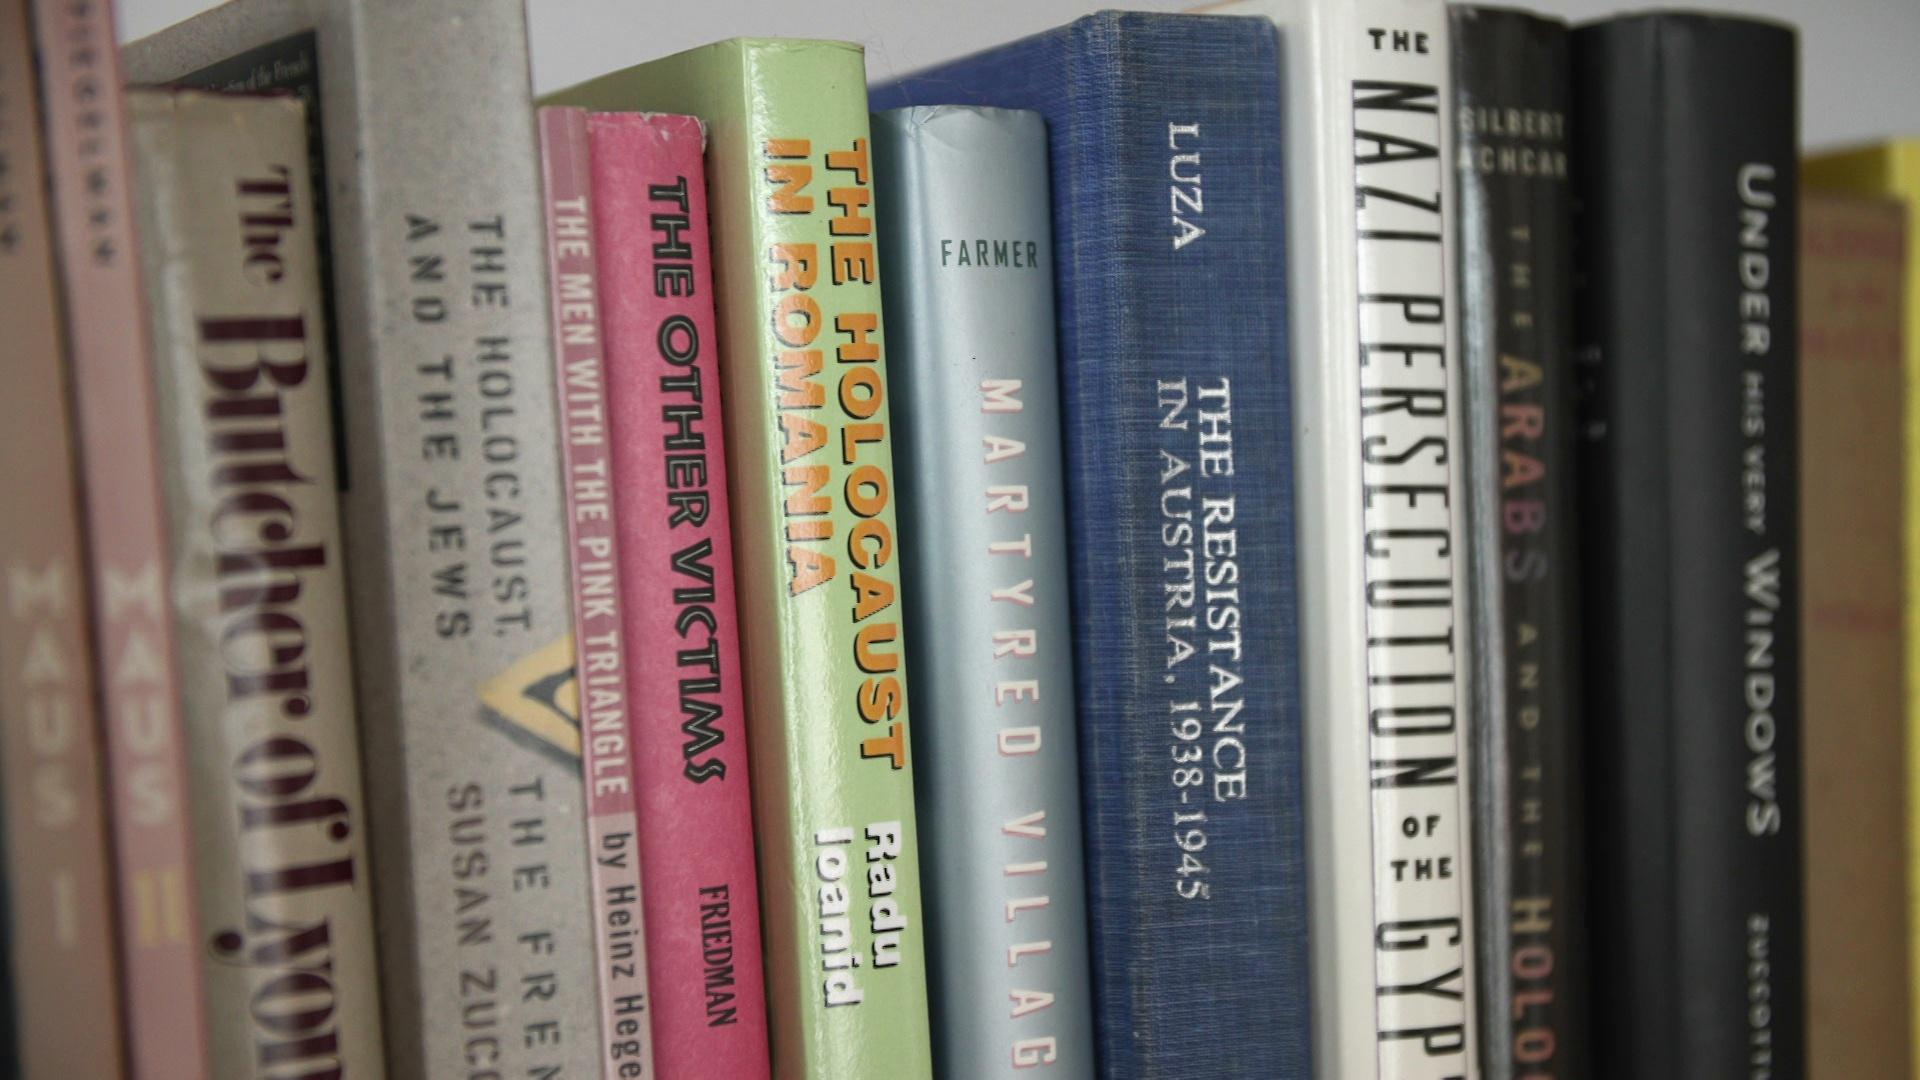 A still image from a video shows a row of books about Jewish history and the Holocaust on a shelf, including titles that read 'The Other Victims,' 'The Holocaust in Romania' and 'The Resistance in Austria, 1938-1945.'